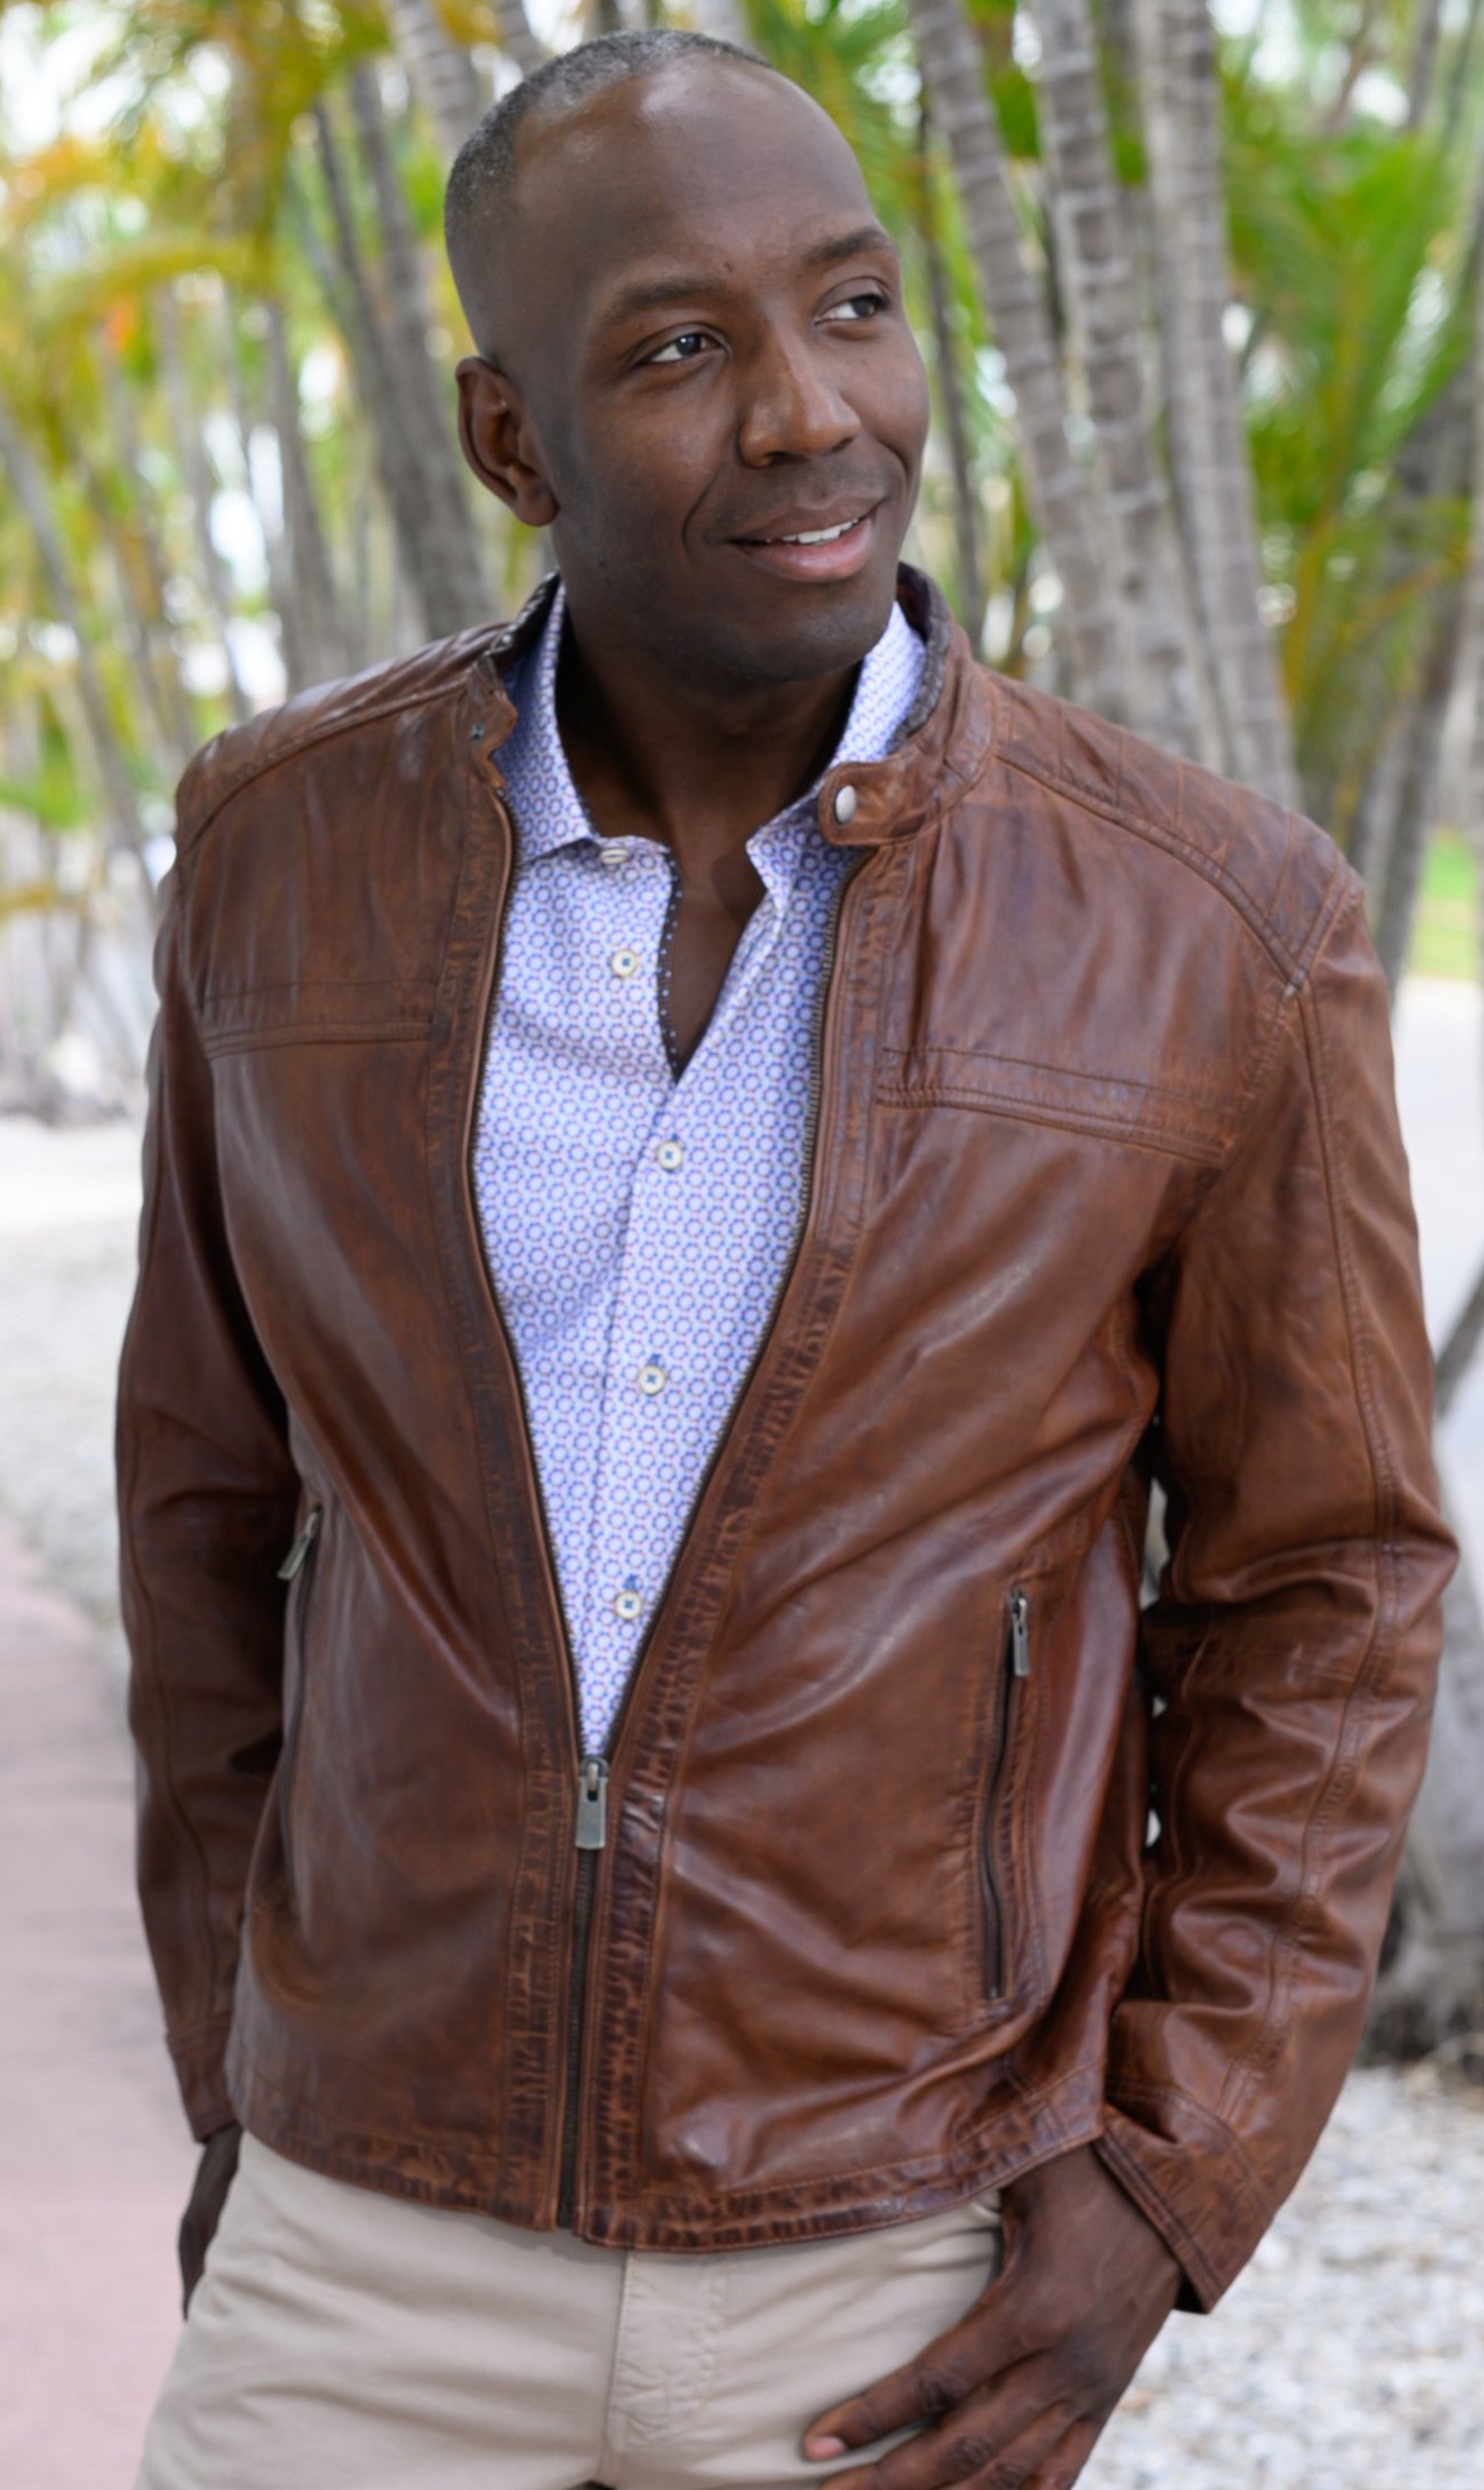 Look smart wearing this tobacco-colored leather bomber jacket. Crafted from soft, washed leather, this classic piece features cool stand-up baseball-style collar, cross-stitch shoulder detailing and open sleeves and bottom for a timeless look. Soft-lined with classic pockets, this bomber jacket offers a classic fit and feel.